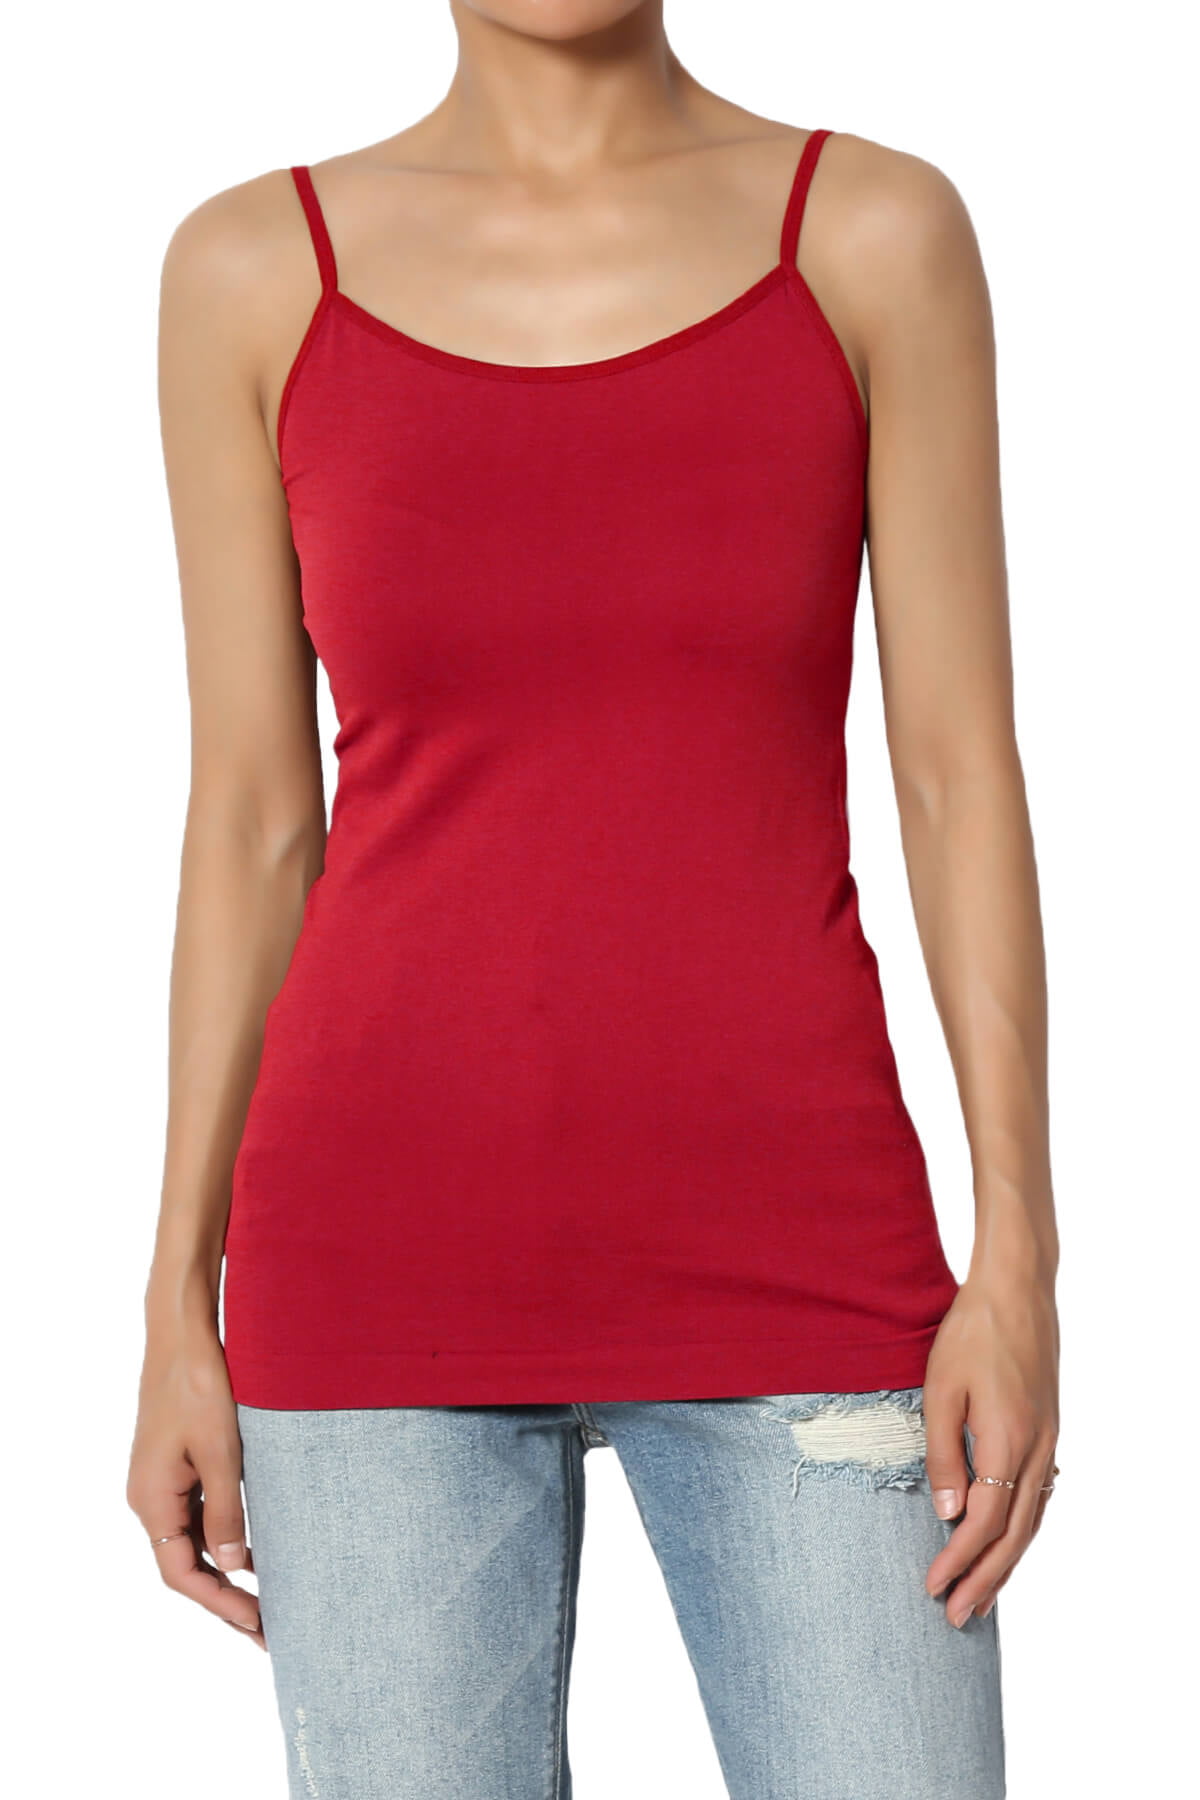 Tan spaghetti strap camisole shirt length tank top for layering. 92% nylon  and 8% spandex. One size fits most., 732441